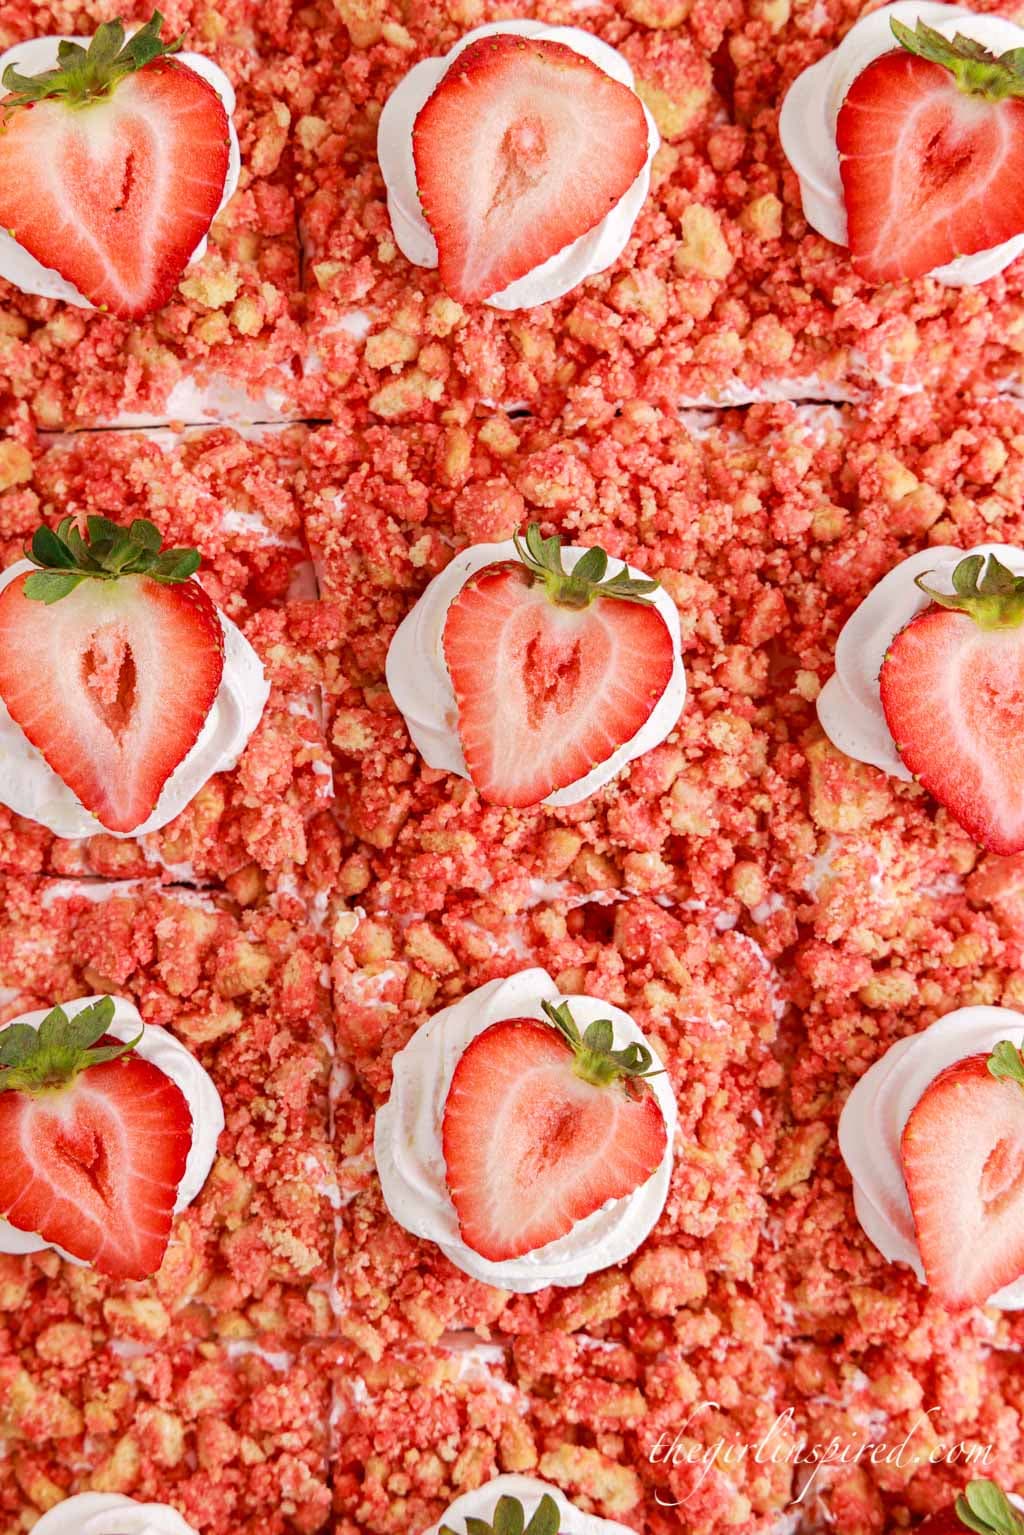 Assembled strawberry crunch poke cake garnished with Cool Whip and halved strawberries, atop a white marble surface with ingredients and a cloth scattered around in the background